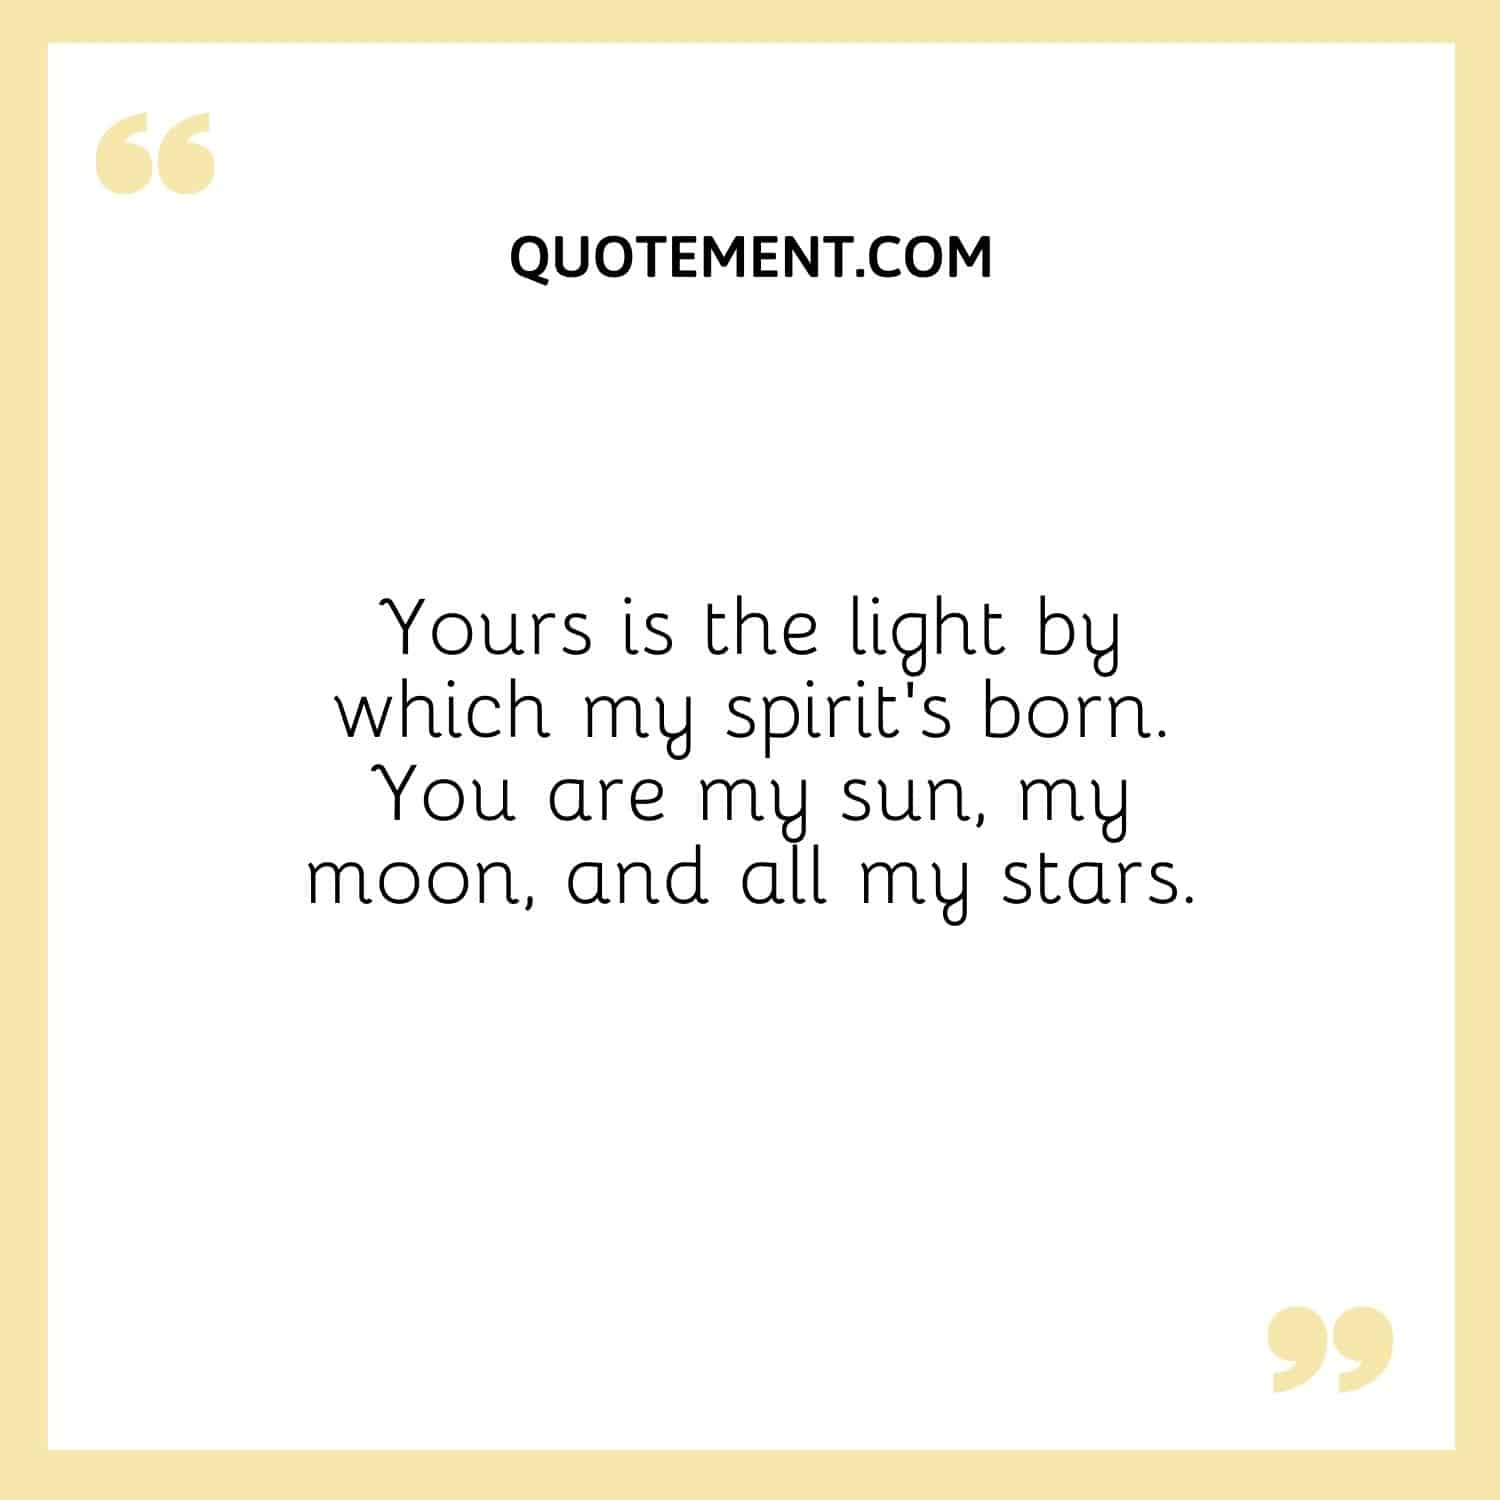 Yours is the light by which my spirit’s born. You are my sun, my moon, and all my stars.